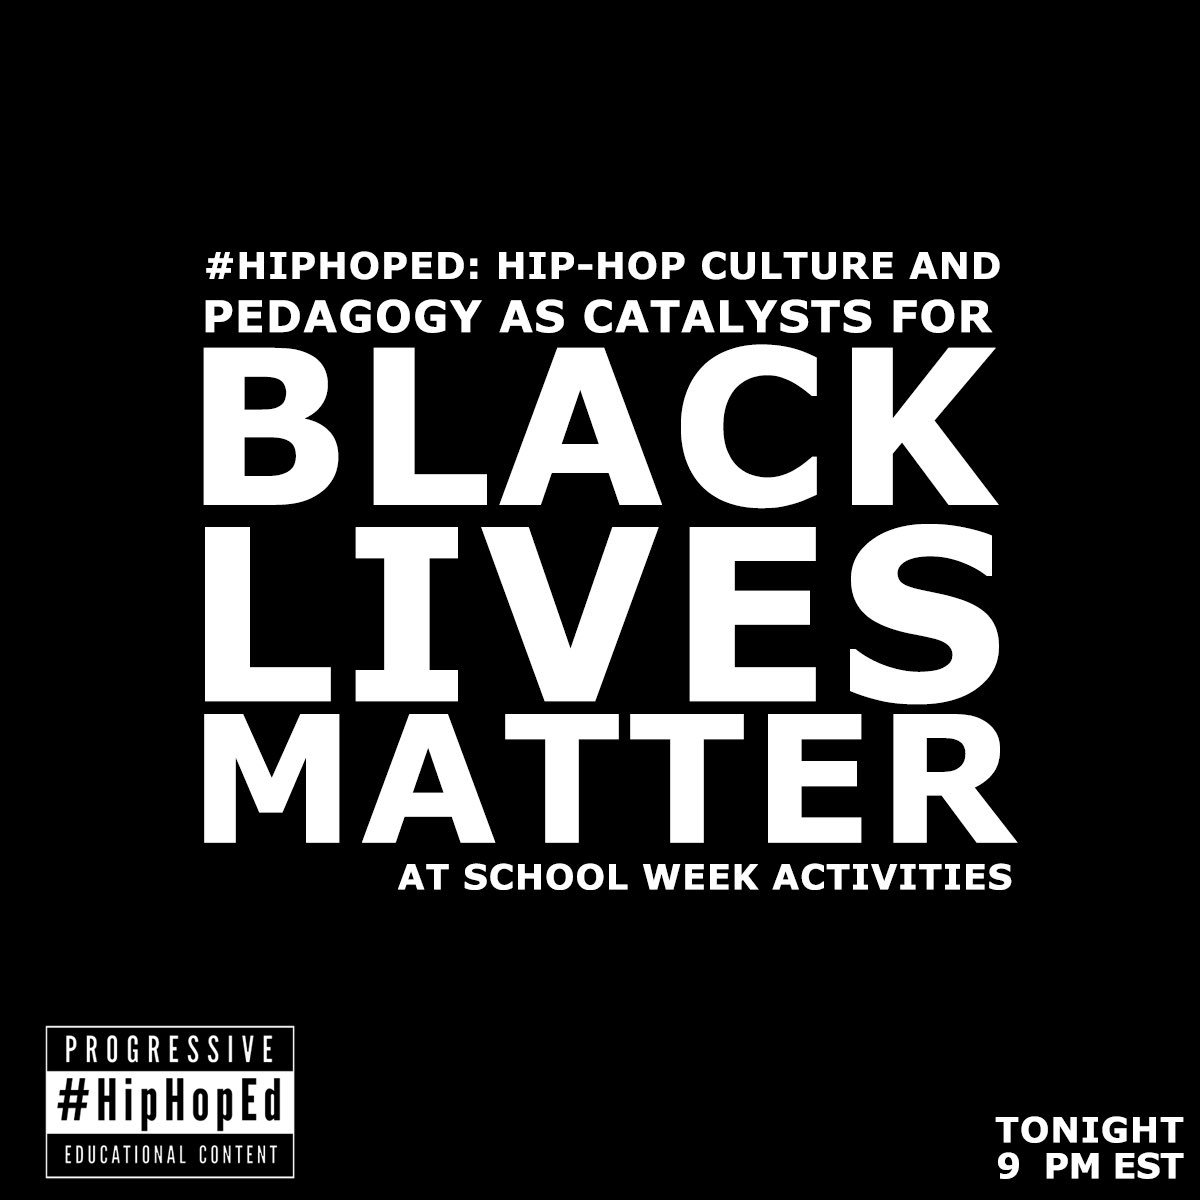 Tonight 9pm EST Hip-Hop Culture and Pedagogy as catalysts for #BlackLivesMatterAtSchoolWeek activities #HipHopEd